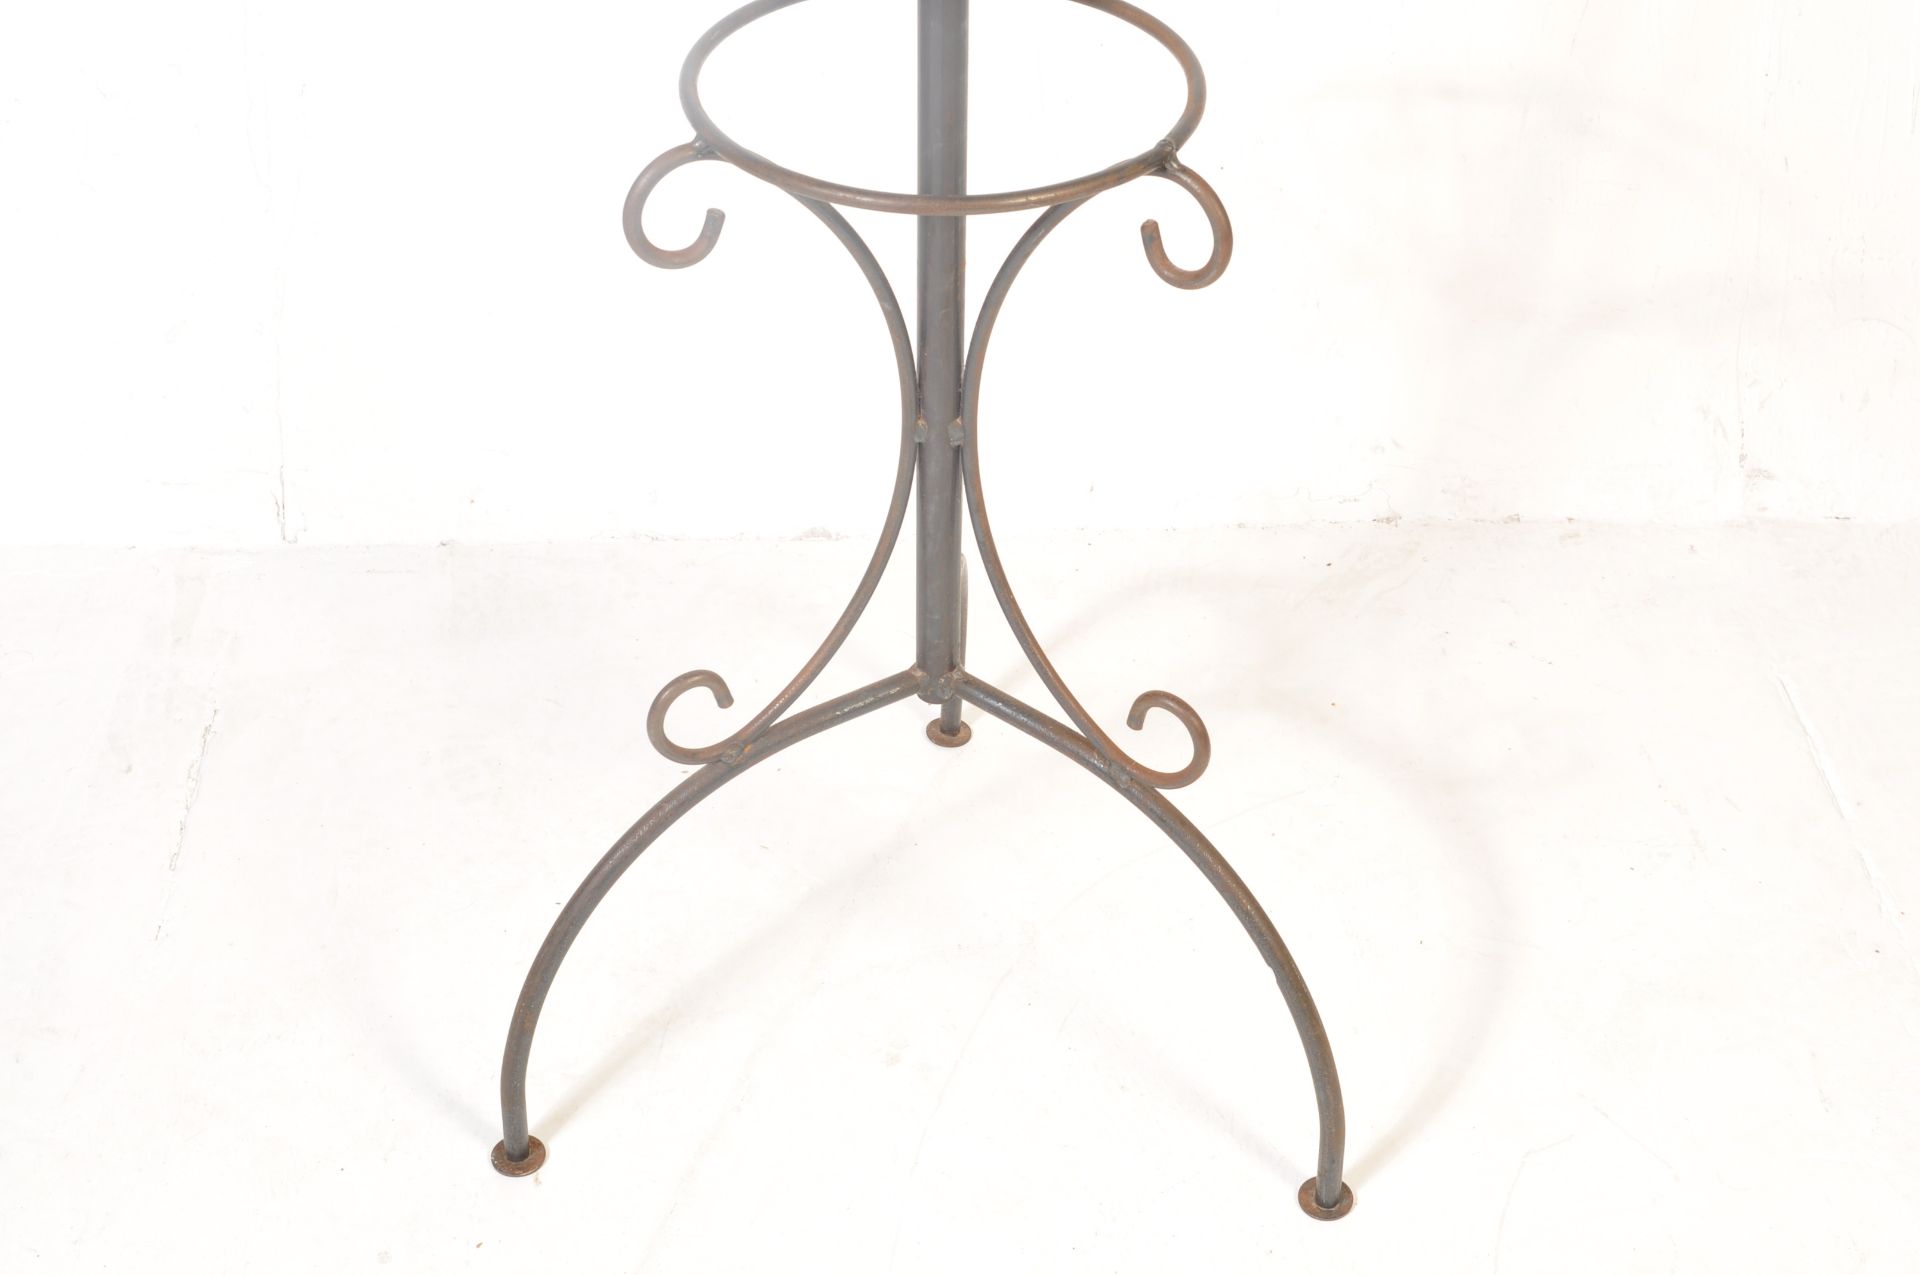 VINTAGE 20TH CENTURY THONET STYLE METAL COST STAND - Image 4 of 4